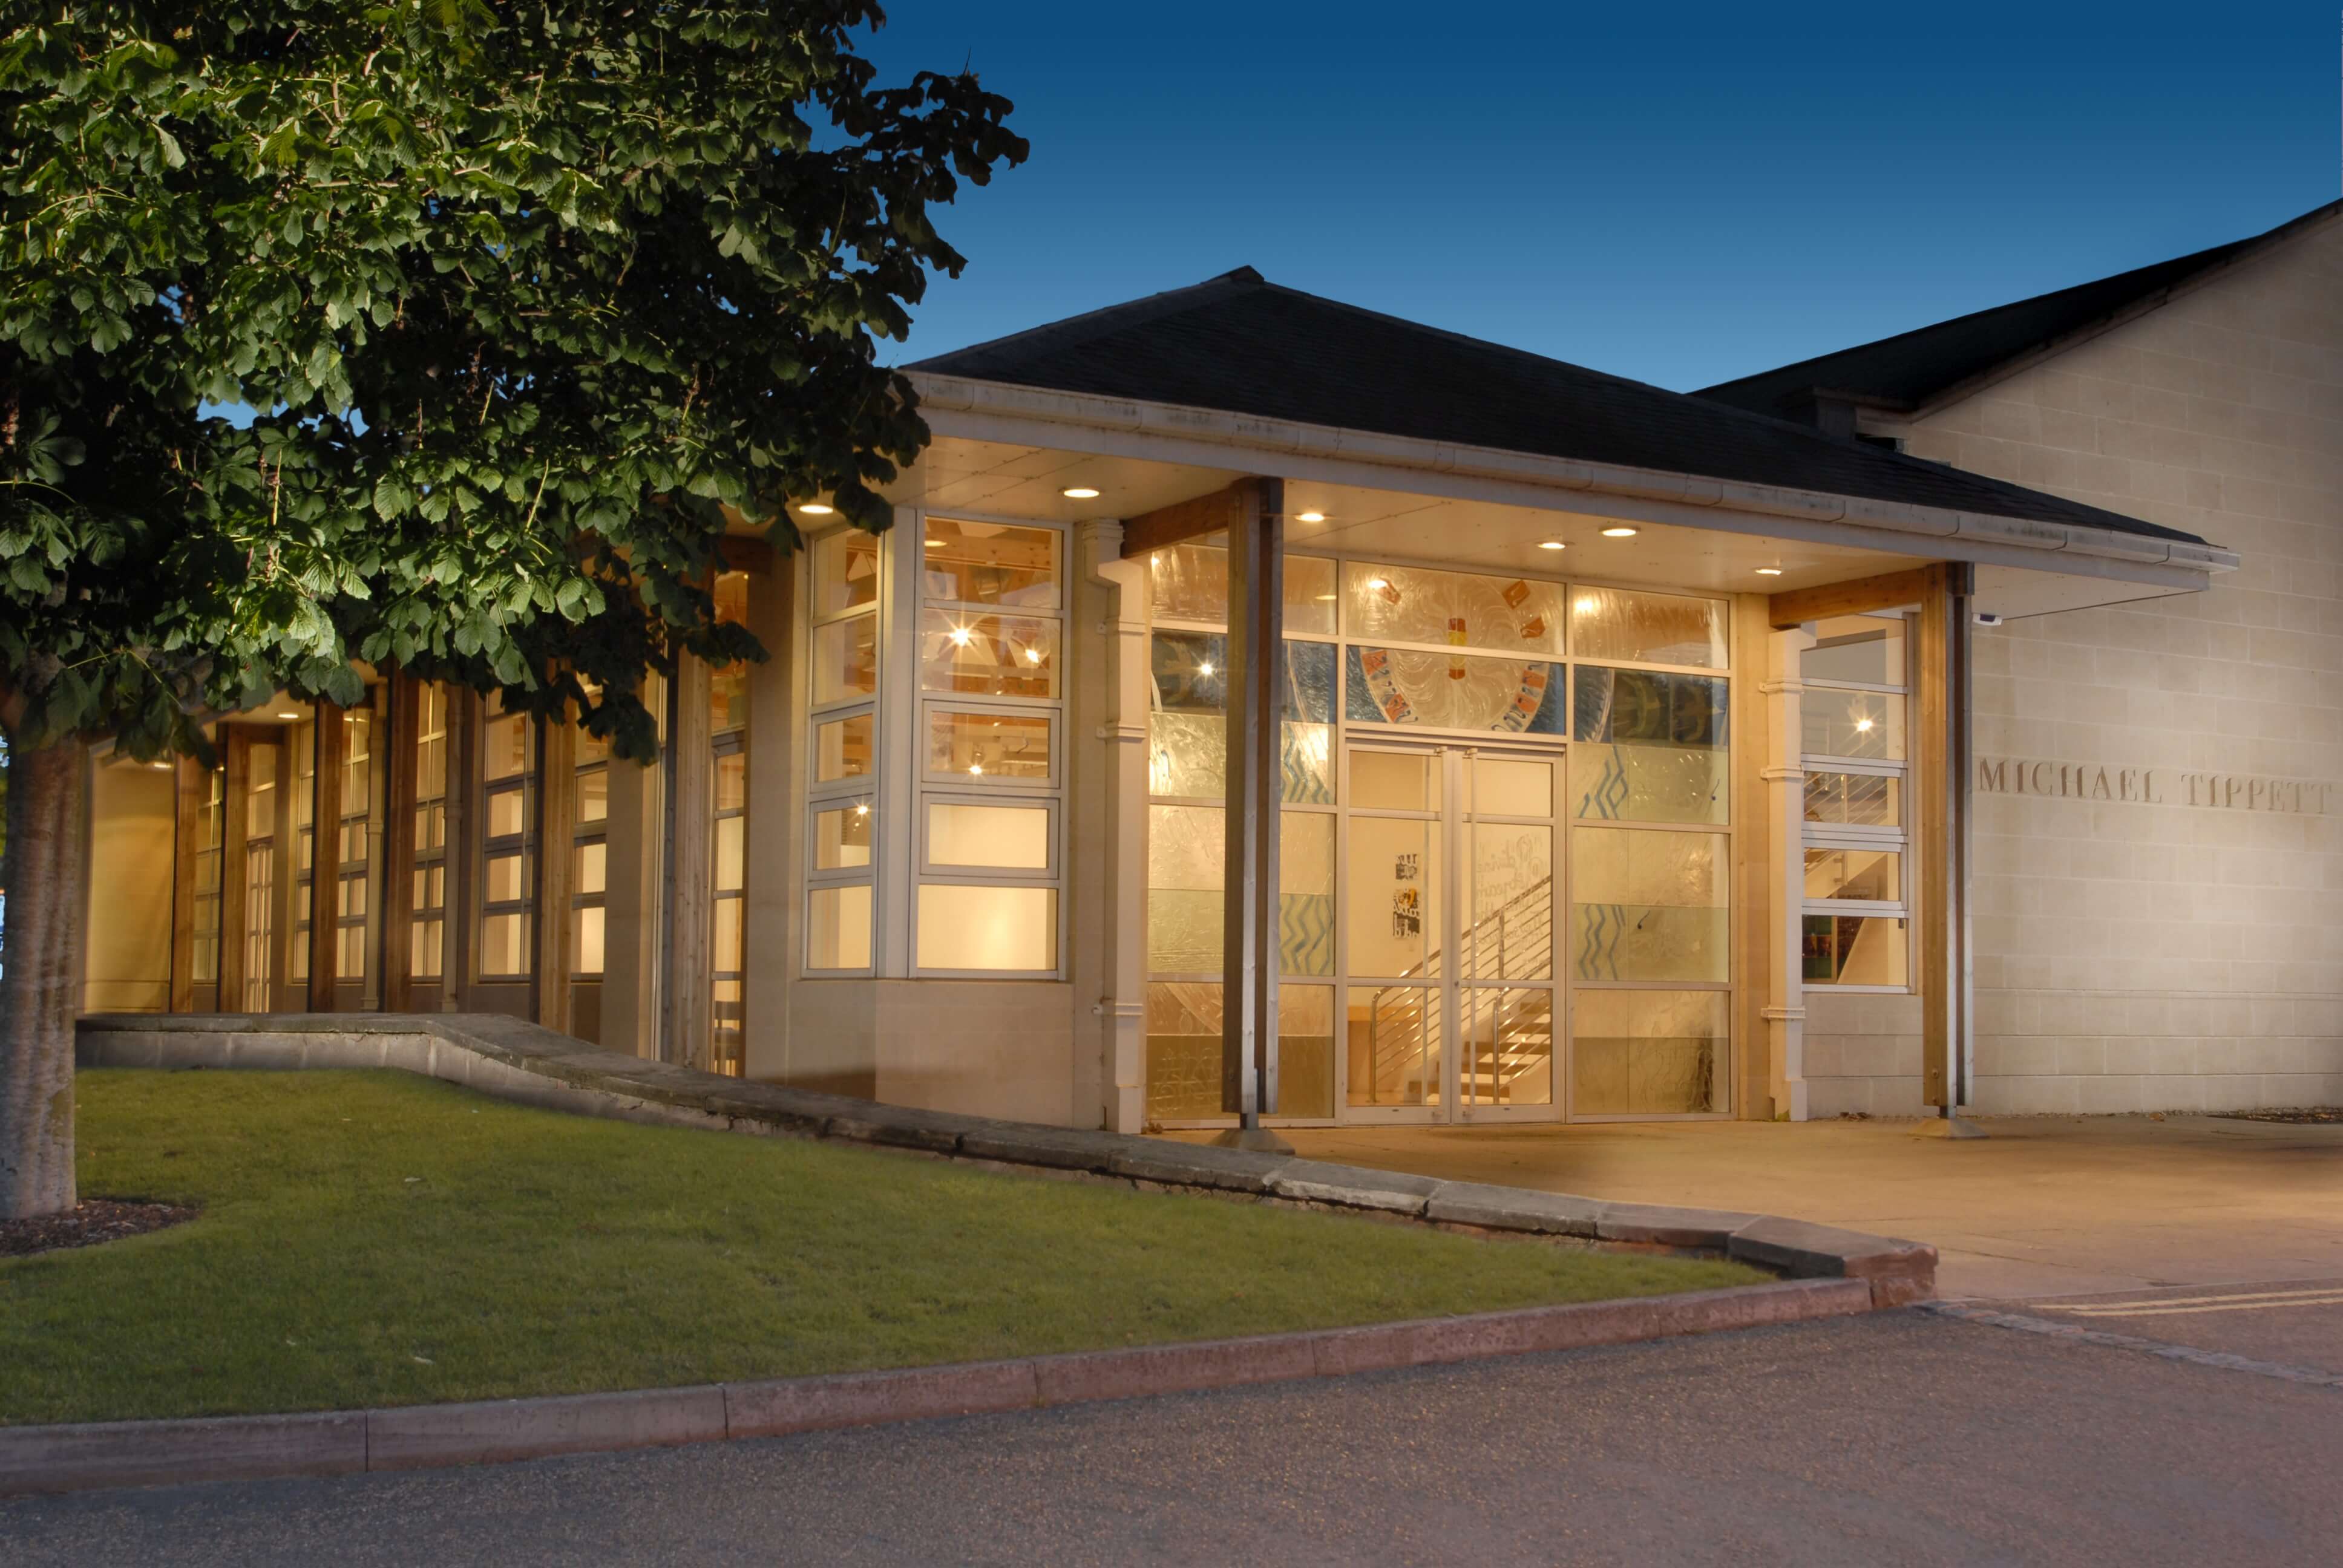 Exterior shot of the Michael Tippett Centre at night